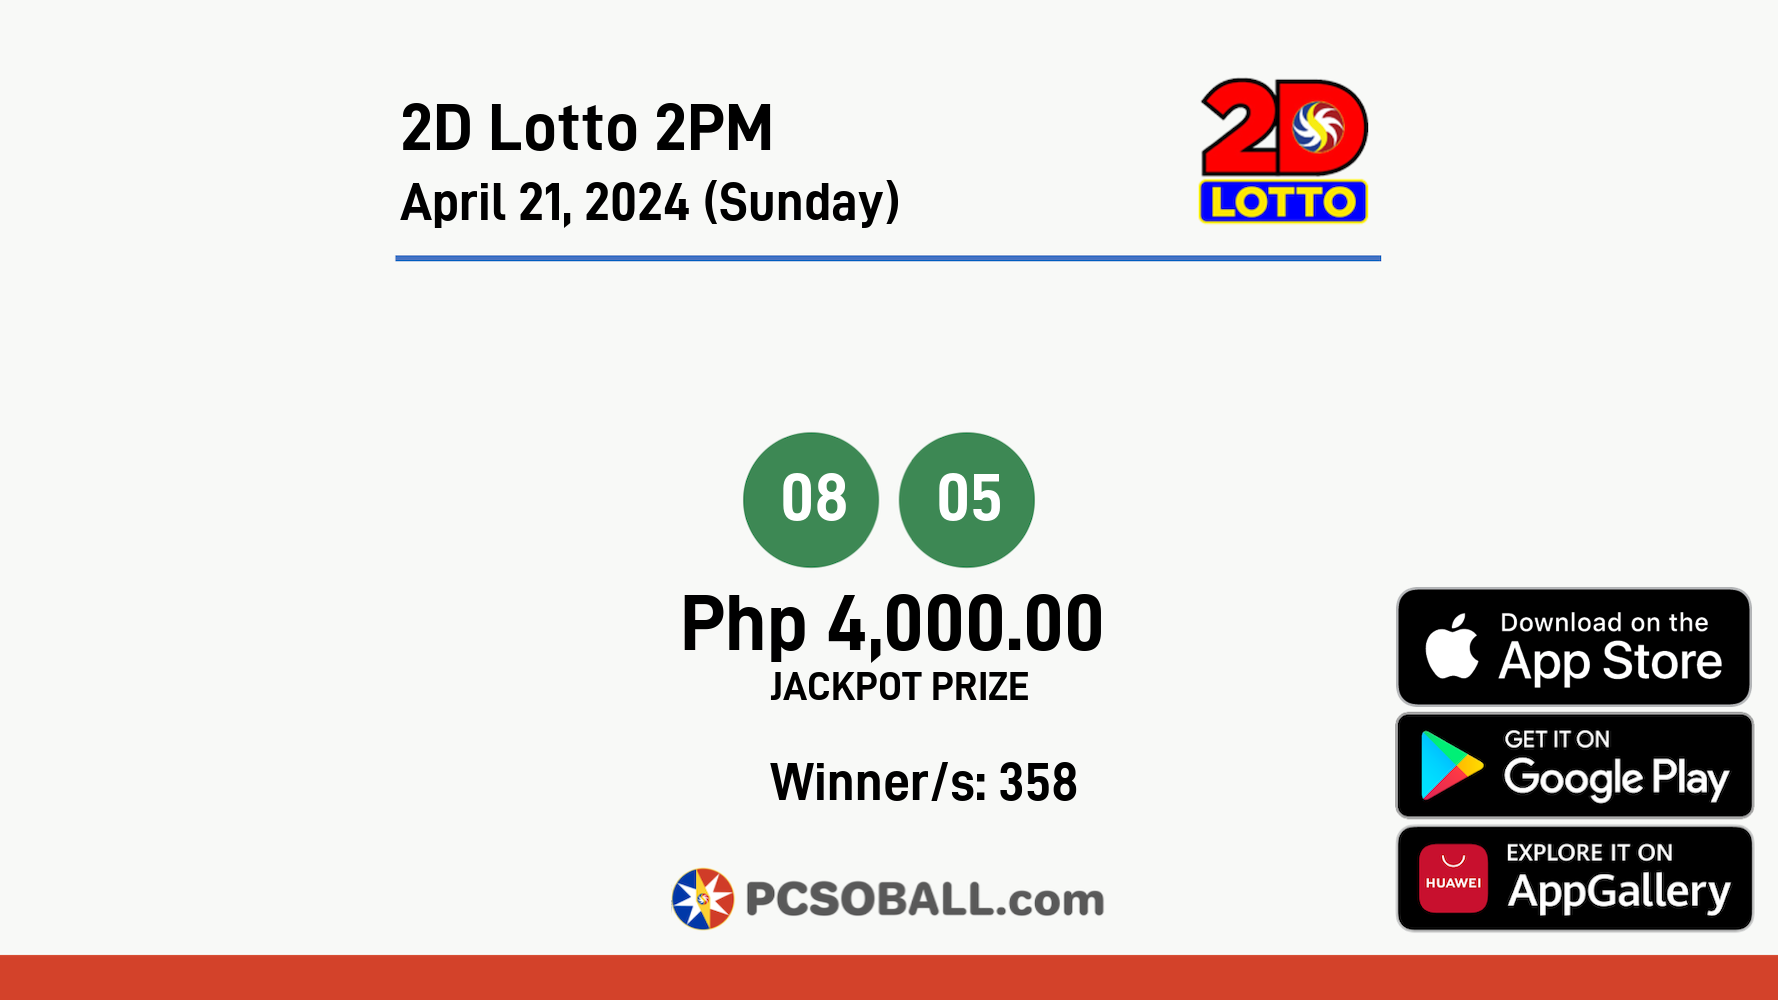 2D Lotto 2PM April 21, 2024 (Sunday) Result